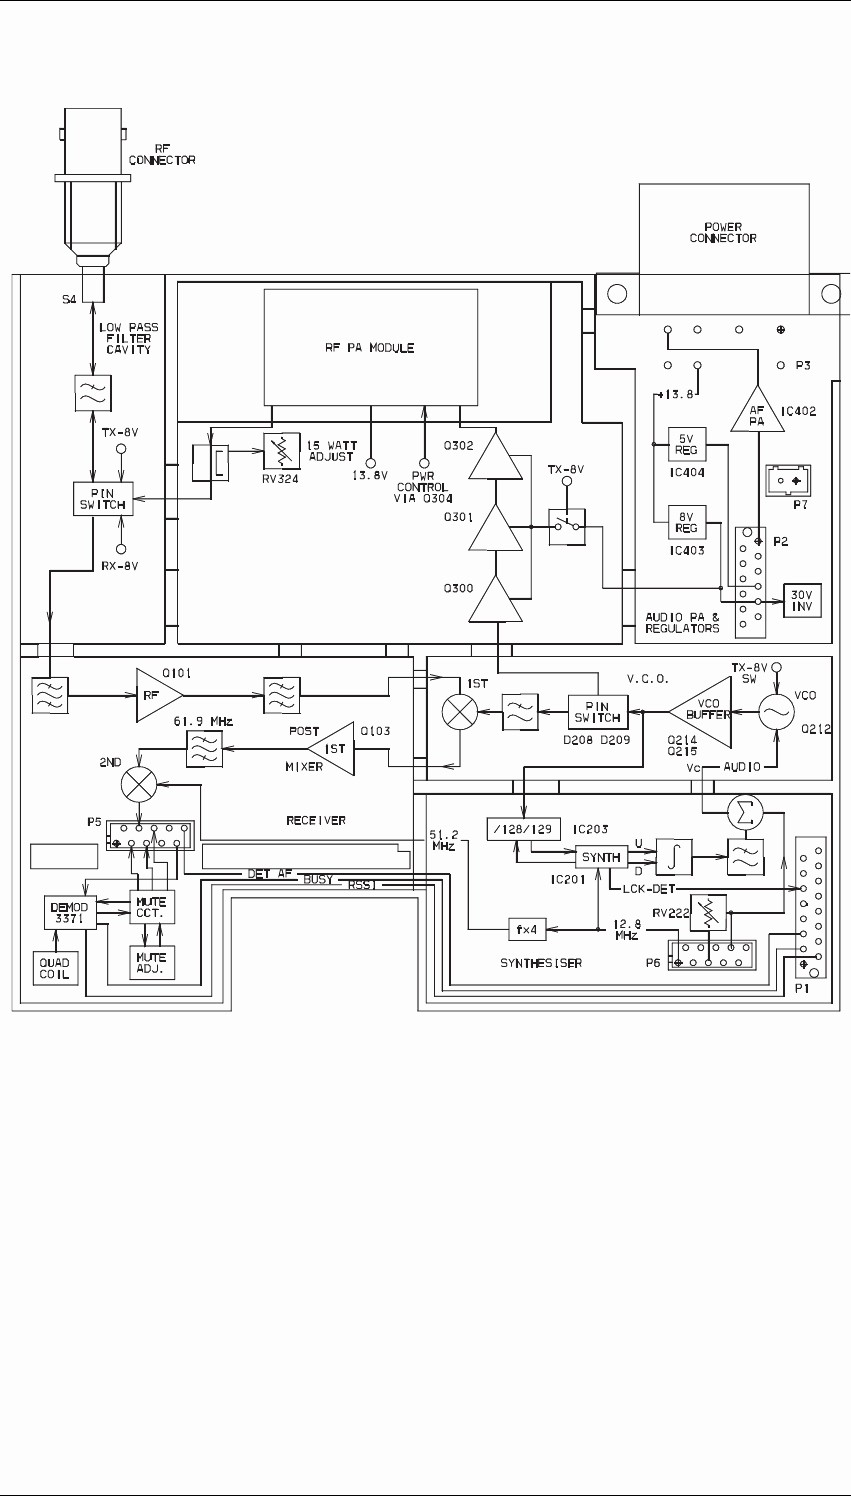 Full Size of Wiring Diagram Signal Stat 900 Wiring Diagram Unique Tel0056 Mobile Transceiver Operational